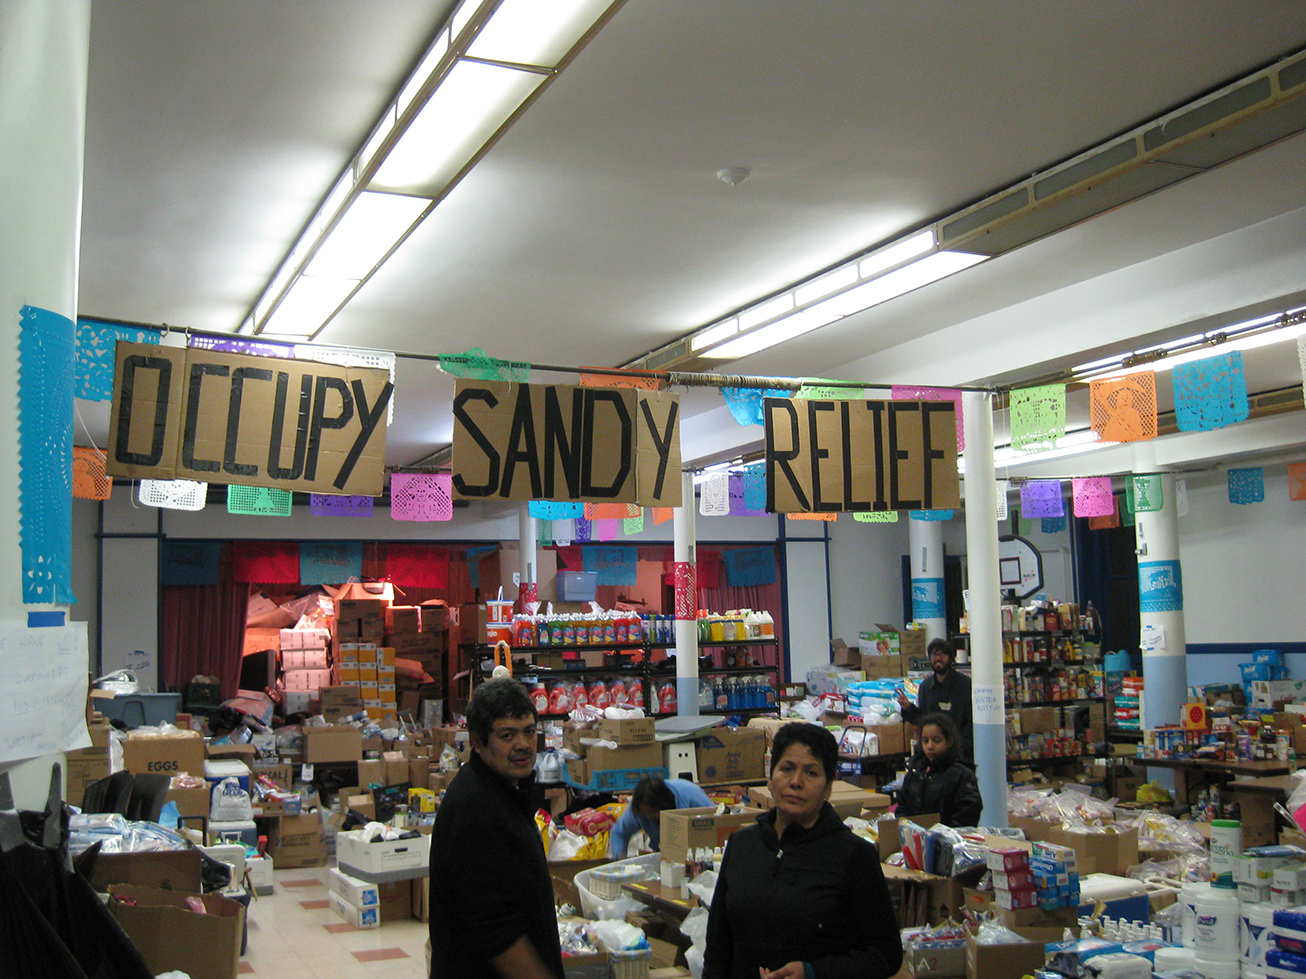 Occupy Sandy: One Year Later